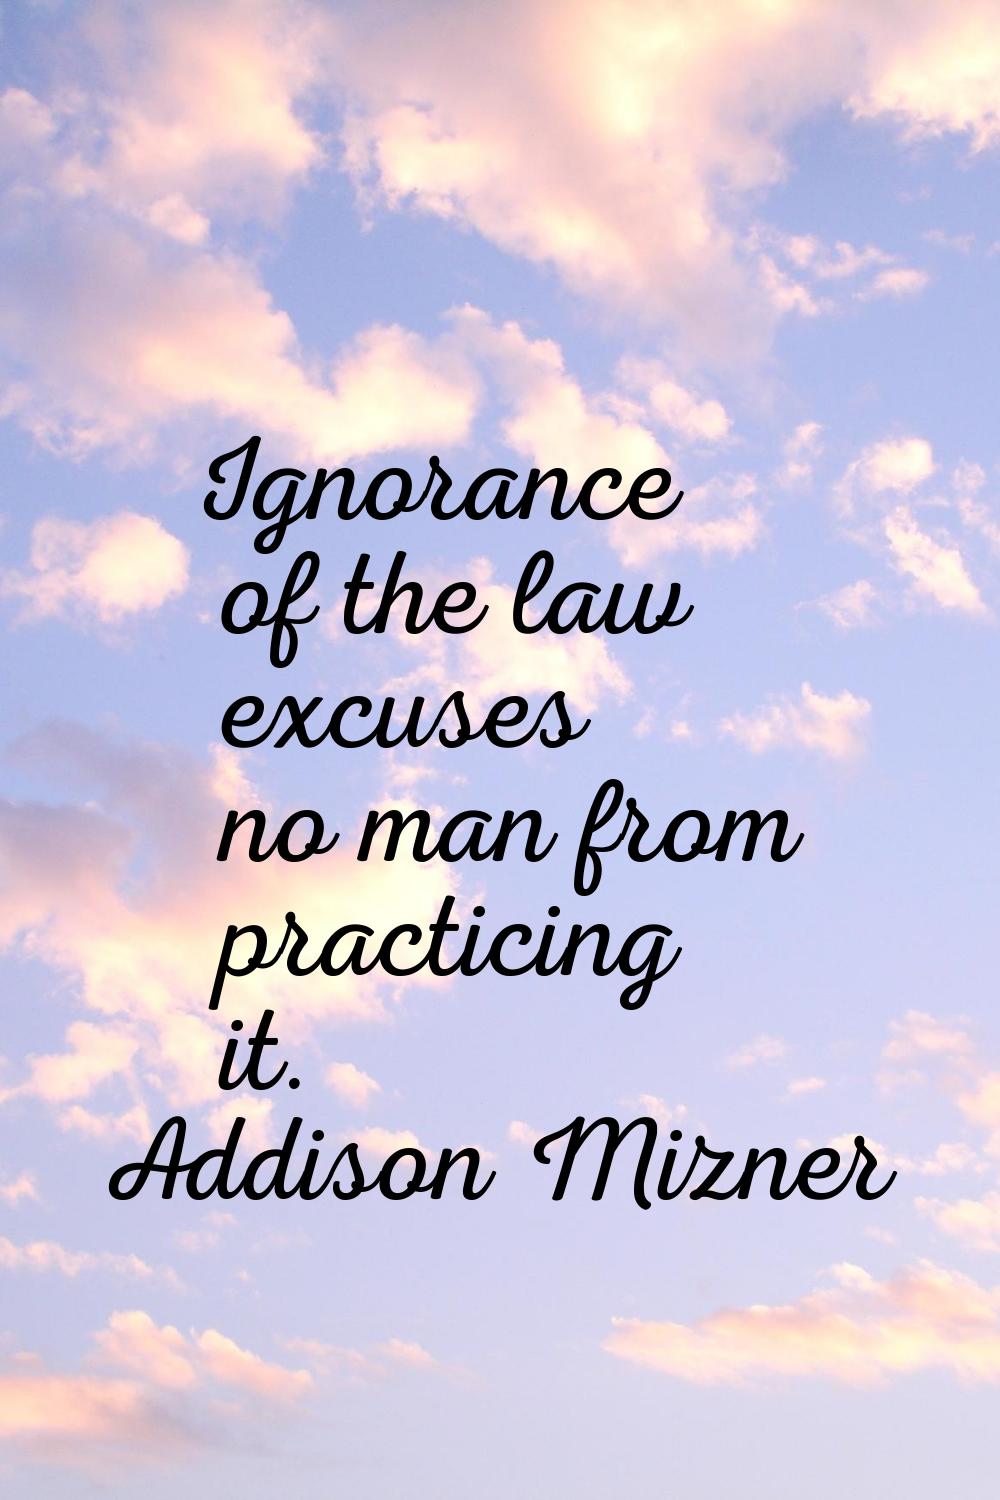 Ignorance of the law excuses no man from practicing it.